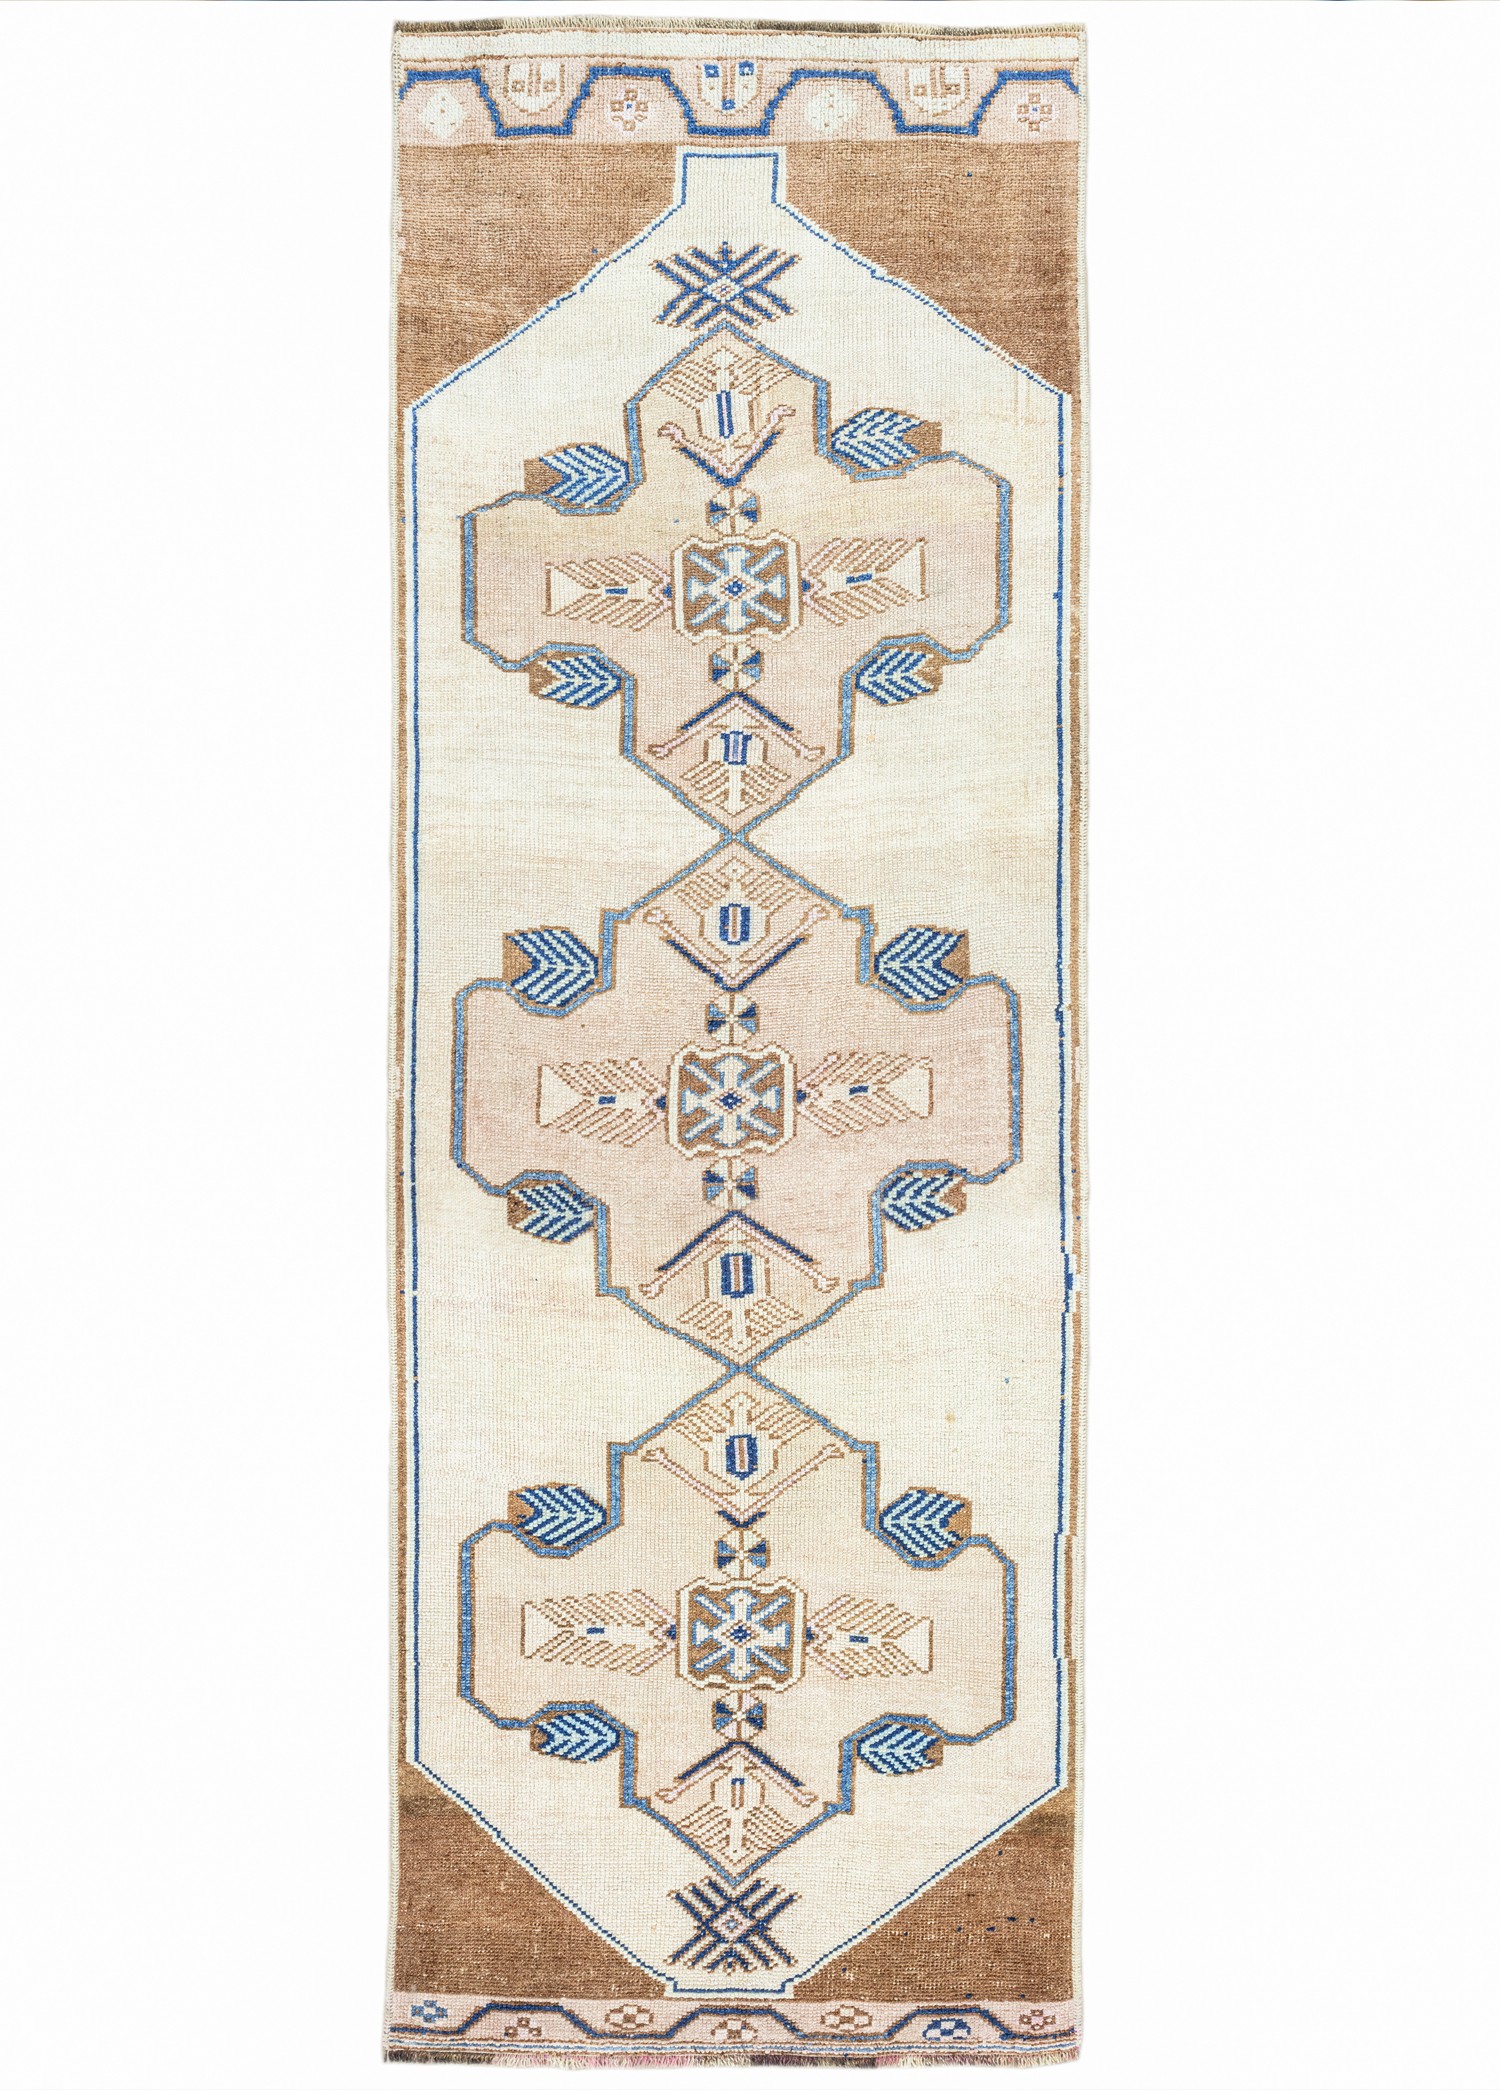 Damra Rustic Patterned Hand-Woven Wool Rug 120x361 cm